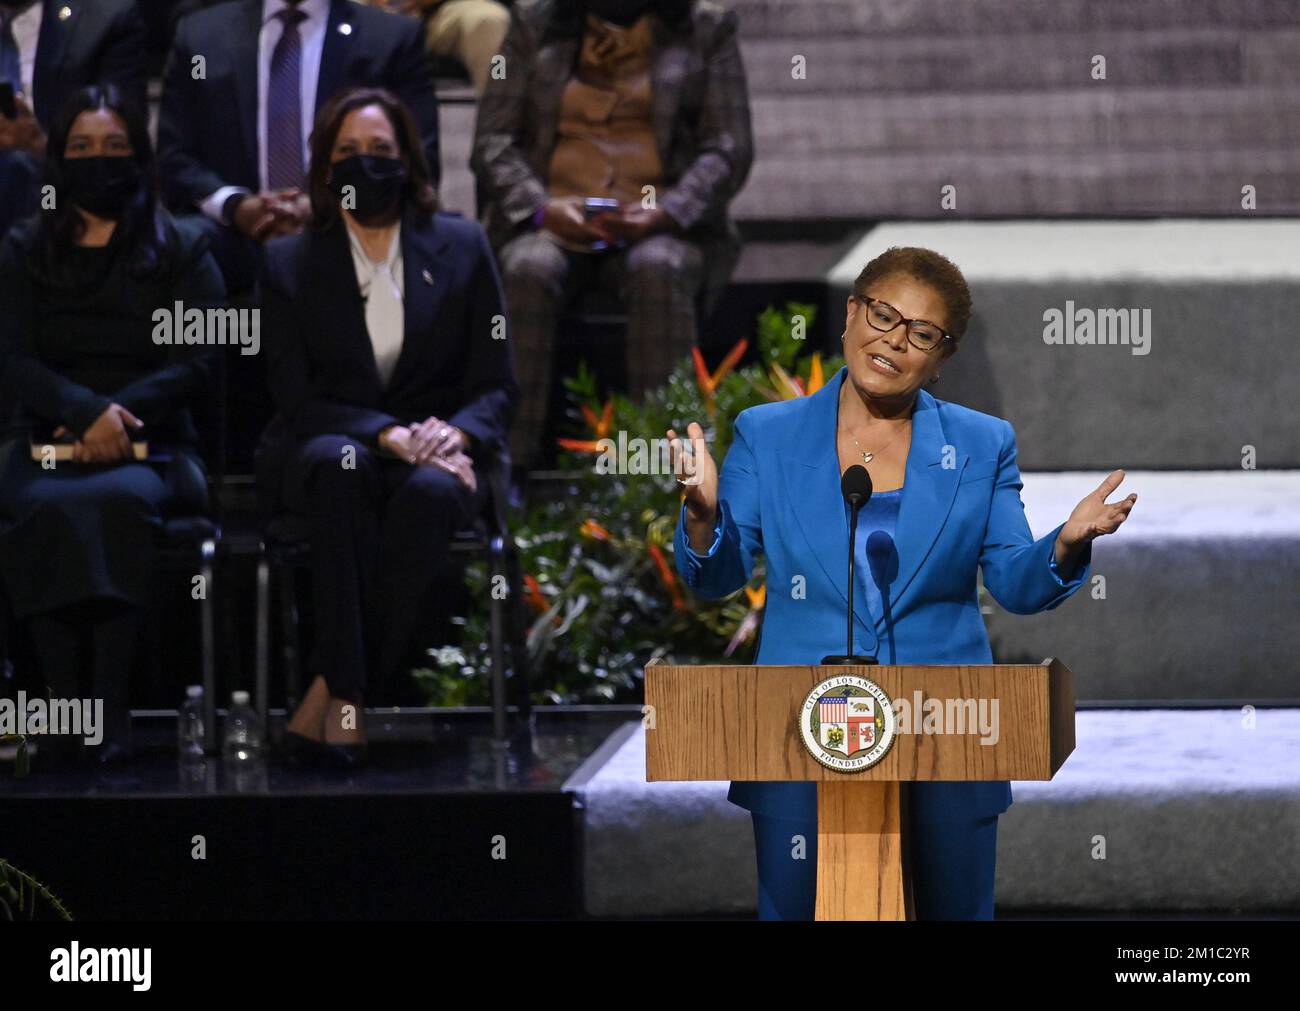 Los Angeles, United States. 11th Dec, 2022. Karen Bass addresses supporters after being sworn in as mayor of Los Angeles by Vice President Kamala Harris, a longtime friend and former California attorney general, at the Microsoft Theater in Los Angeles on Sunday, December 11, 2022. Photo by Jim Ruymen/UPI Credit: UPI/Alamy Live News Stock Photo